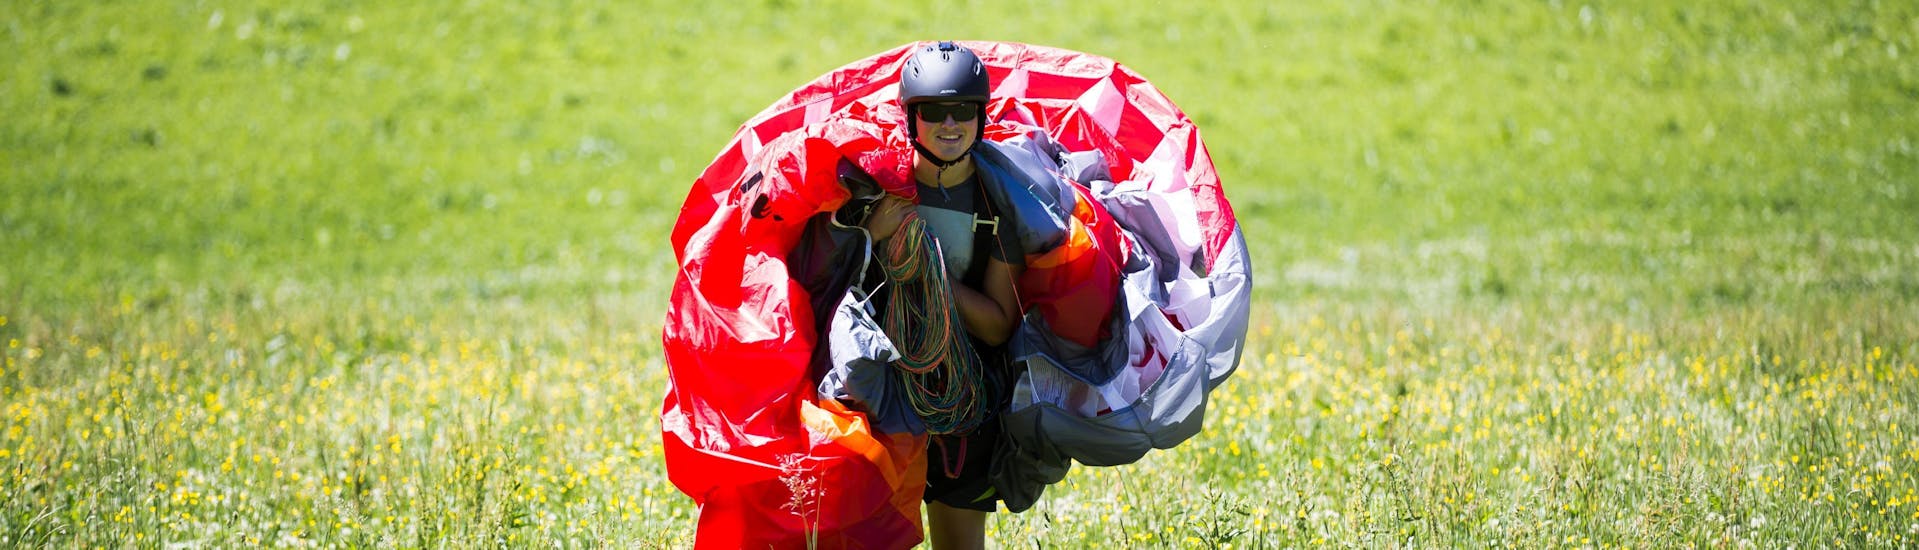 A costumer during the 6-Day Basic Paragliding Course in Werfenweng with Flugschule Austriafly Werfenweng.